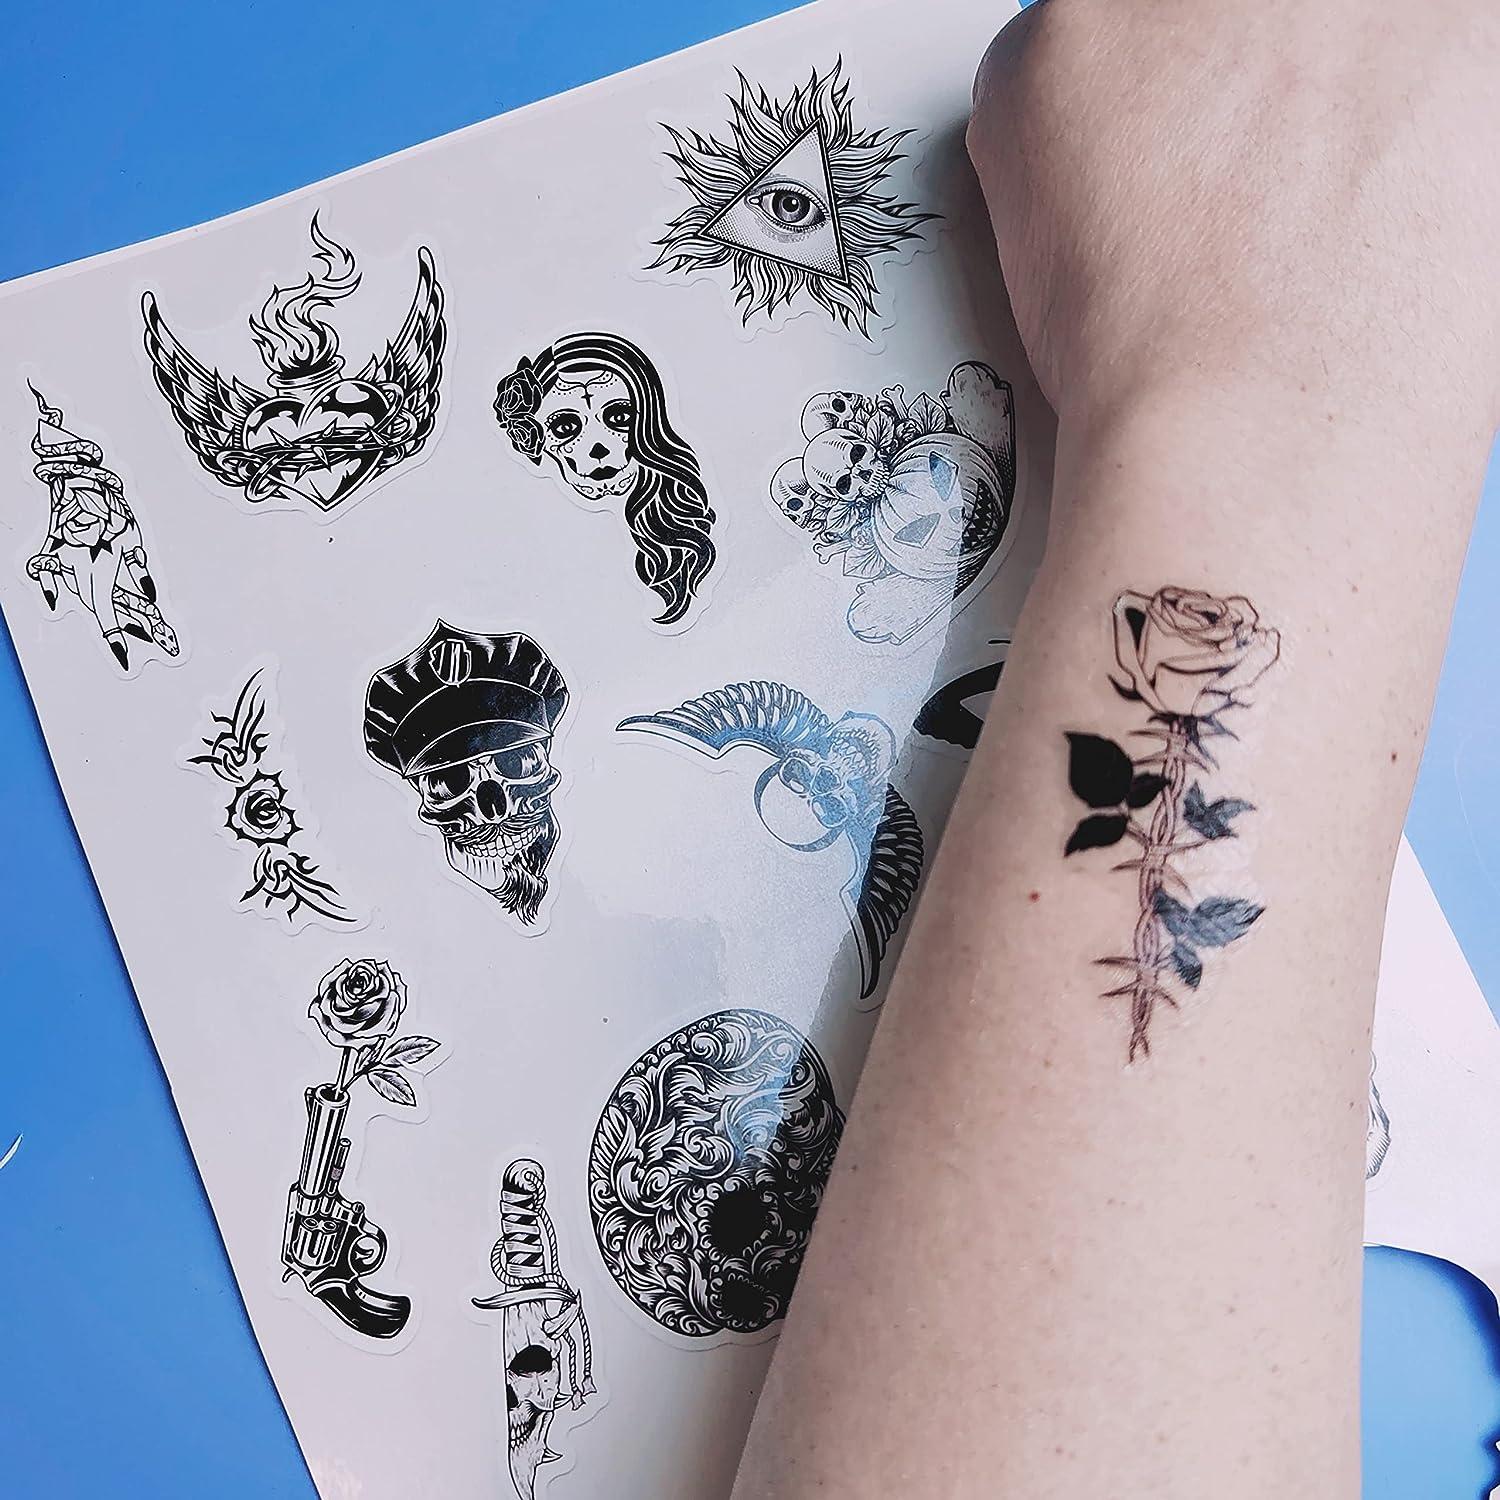 Temporary LASER TATTOO Paper and make your own design - 5 sheets